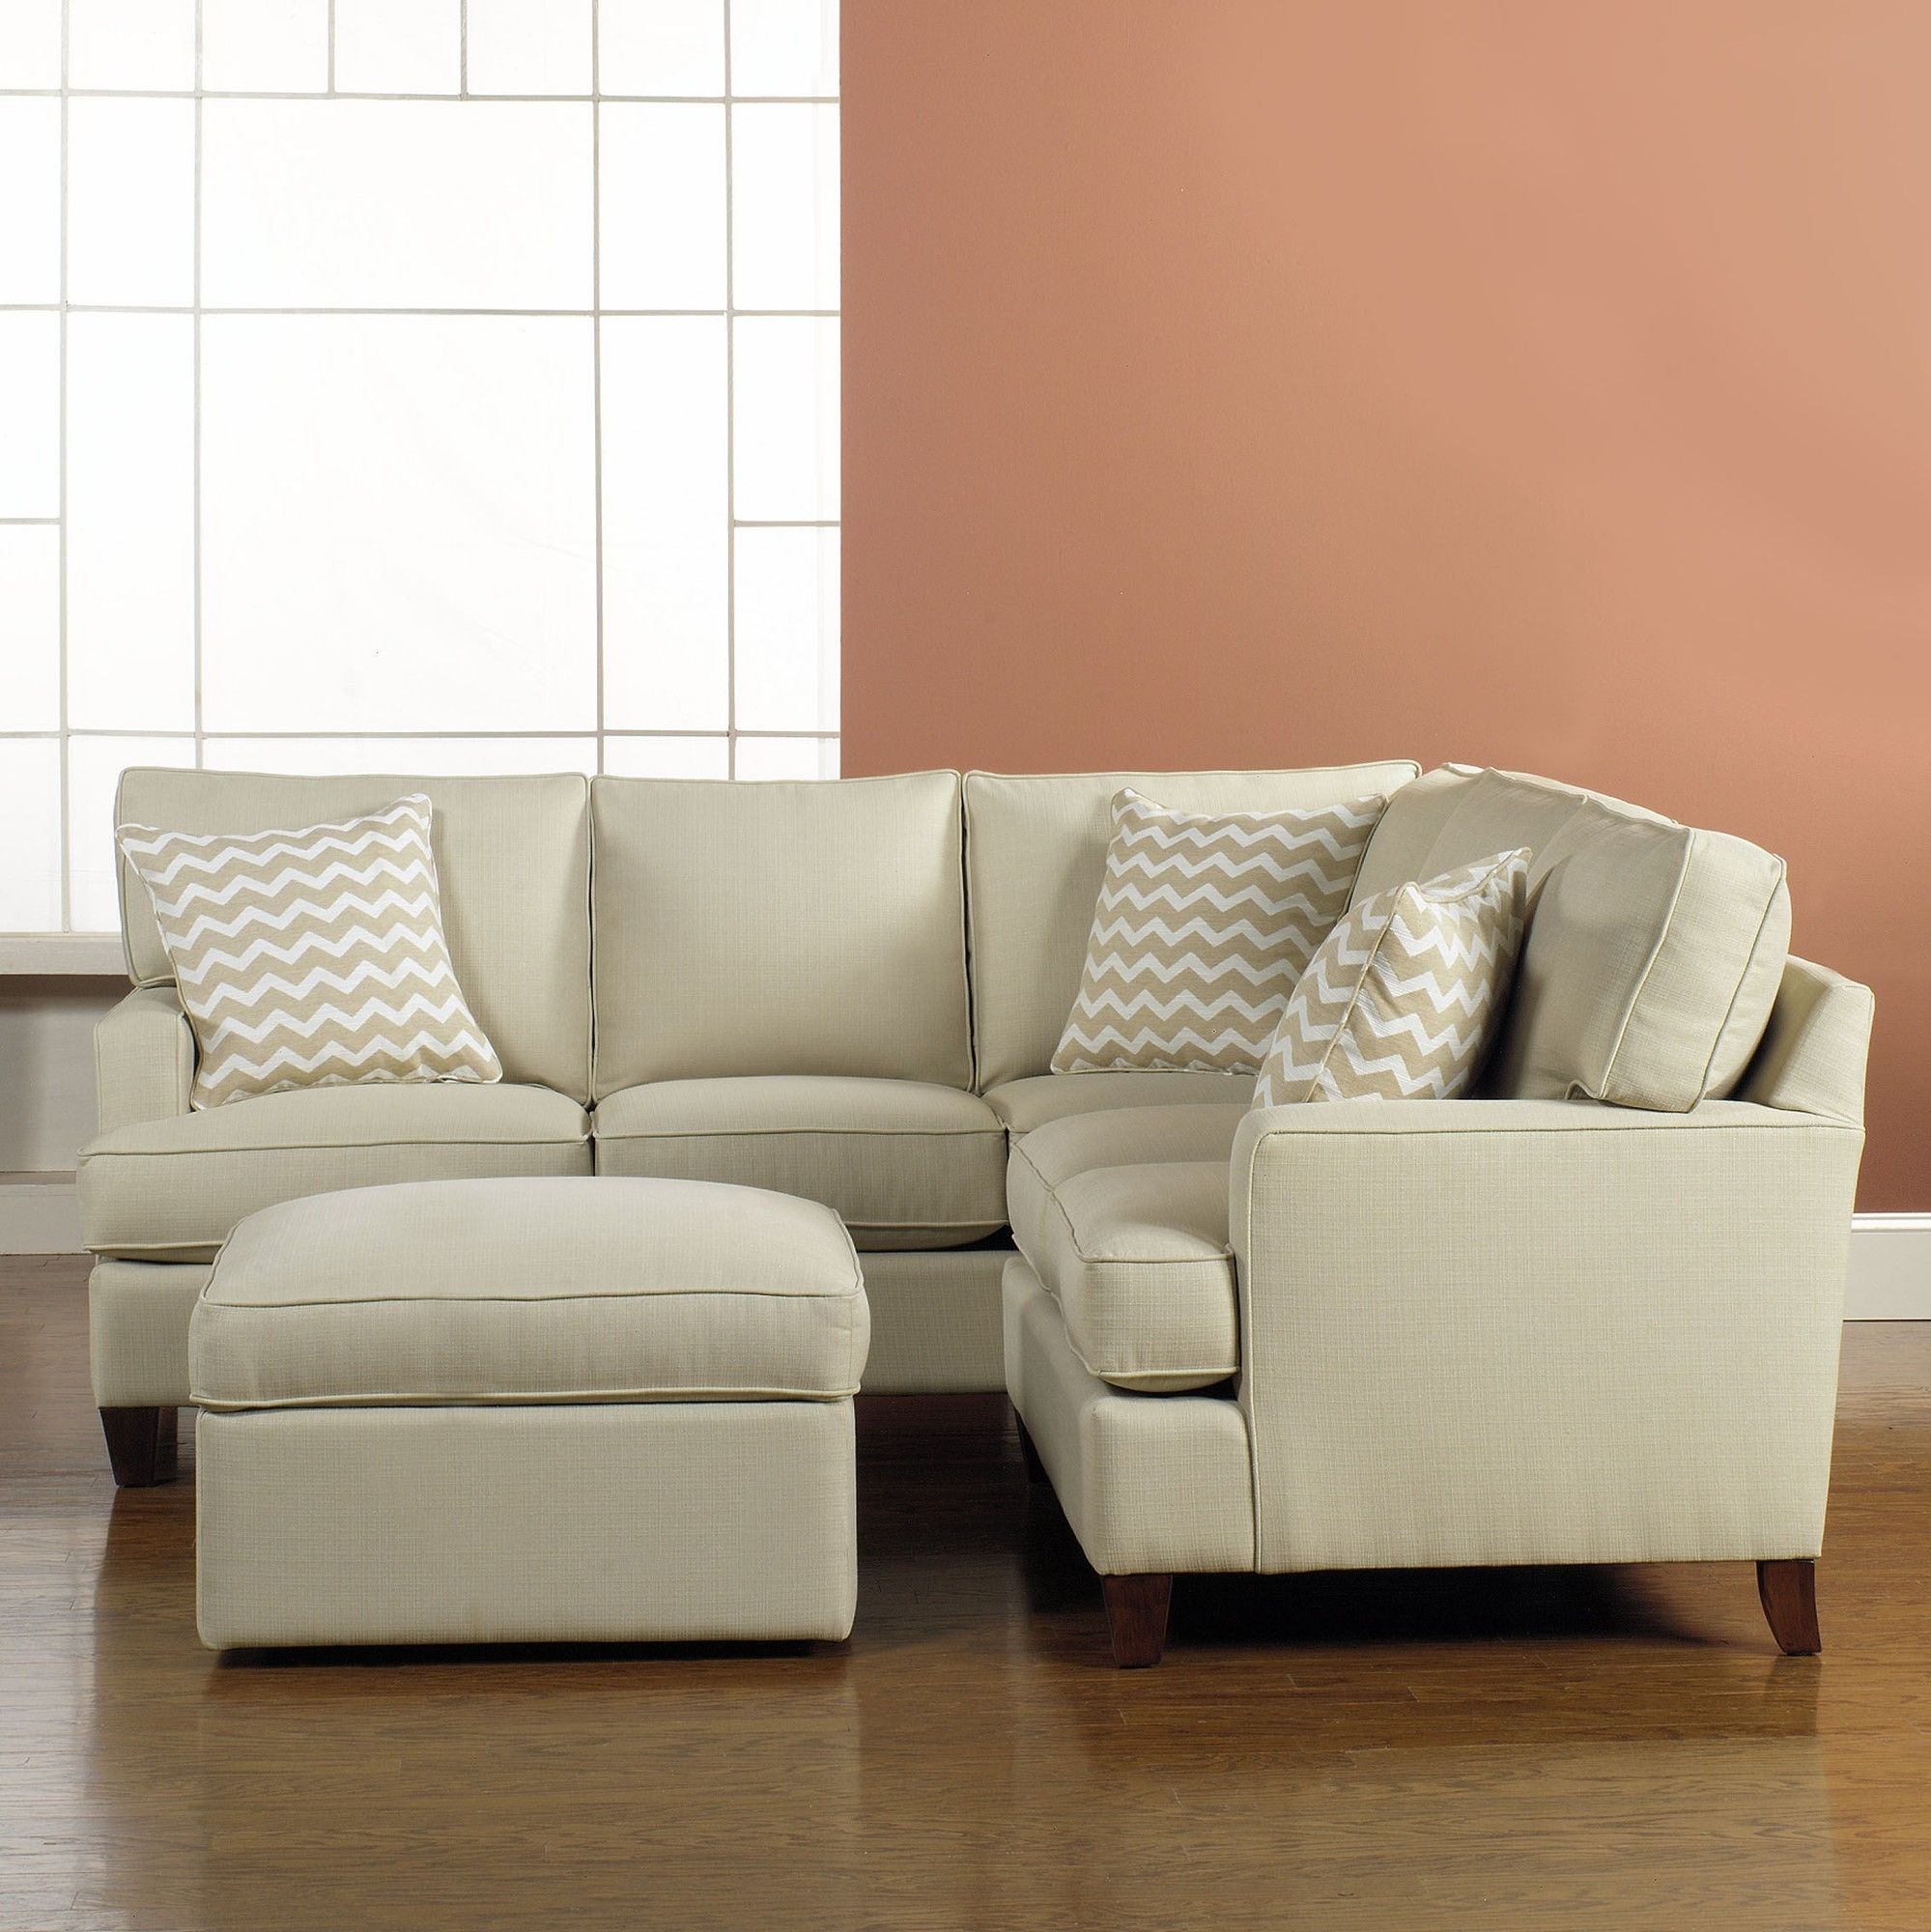 Awesome Small Sectional Sofa For Small Spaces – Buildsimplehome Within Narrow Spaces Sectional Sofas (View 2 of 10)